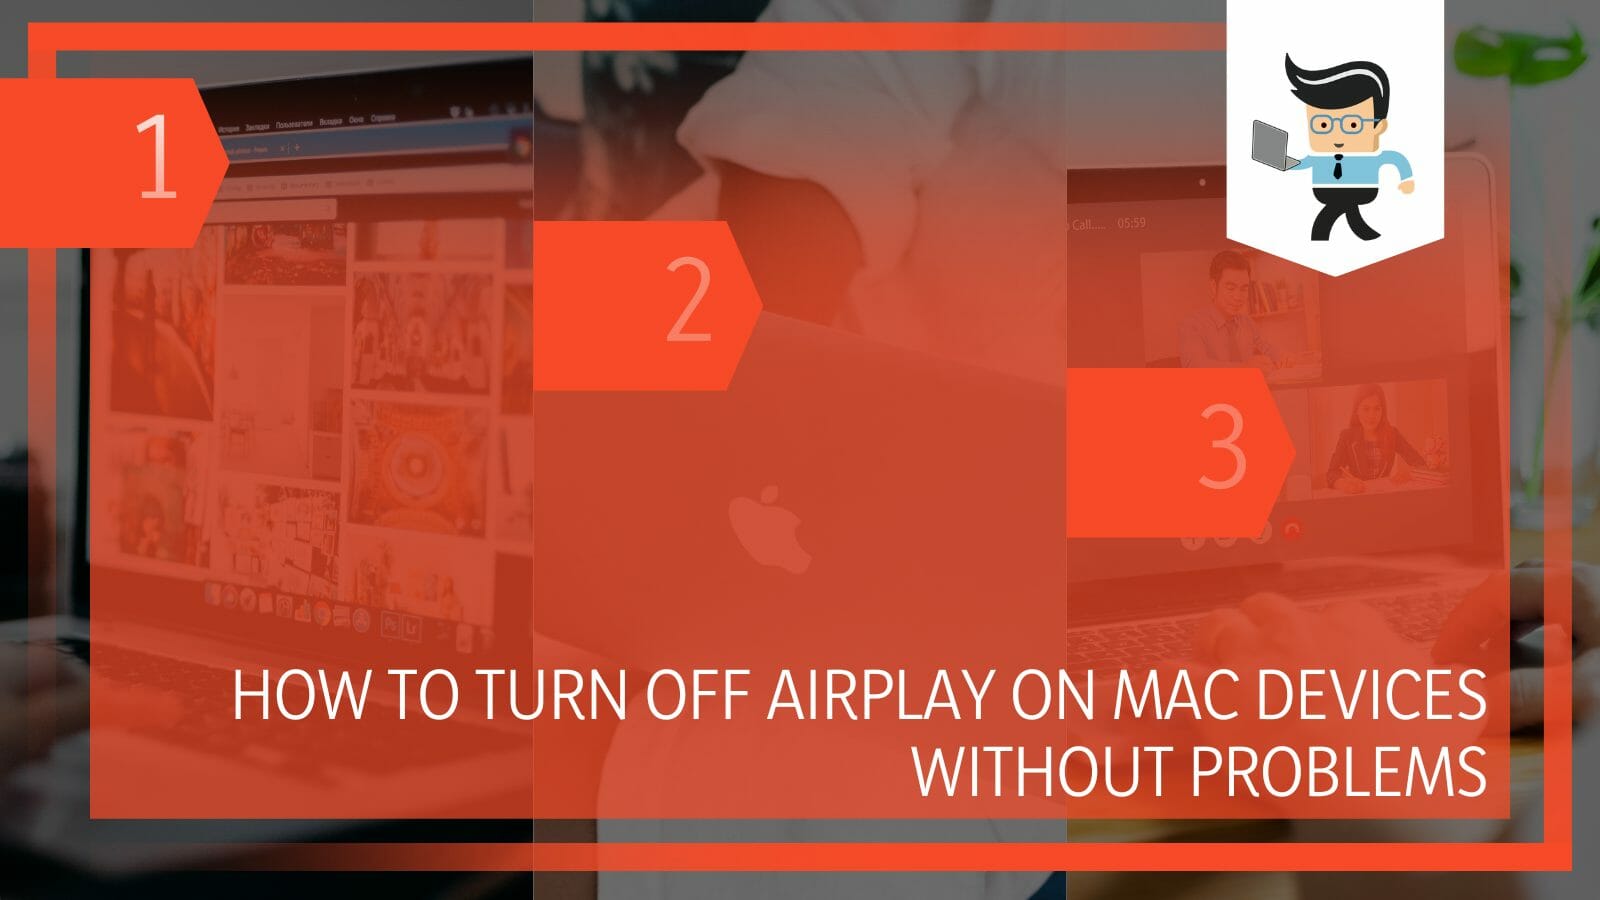 Turn Off Airplay on Mac Devices Without Problems